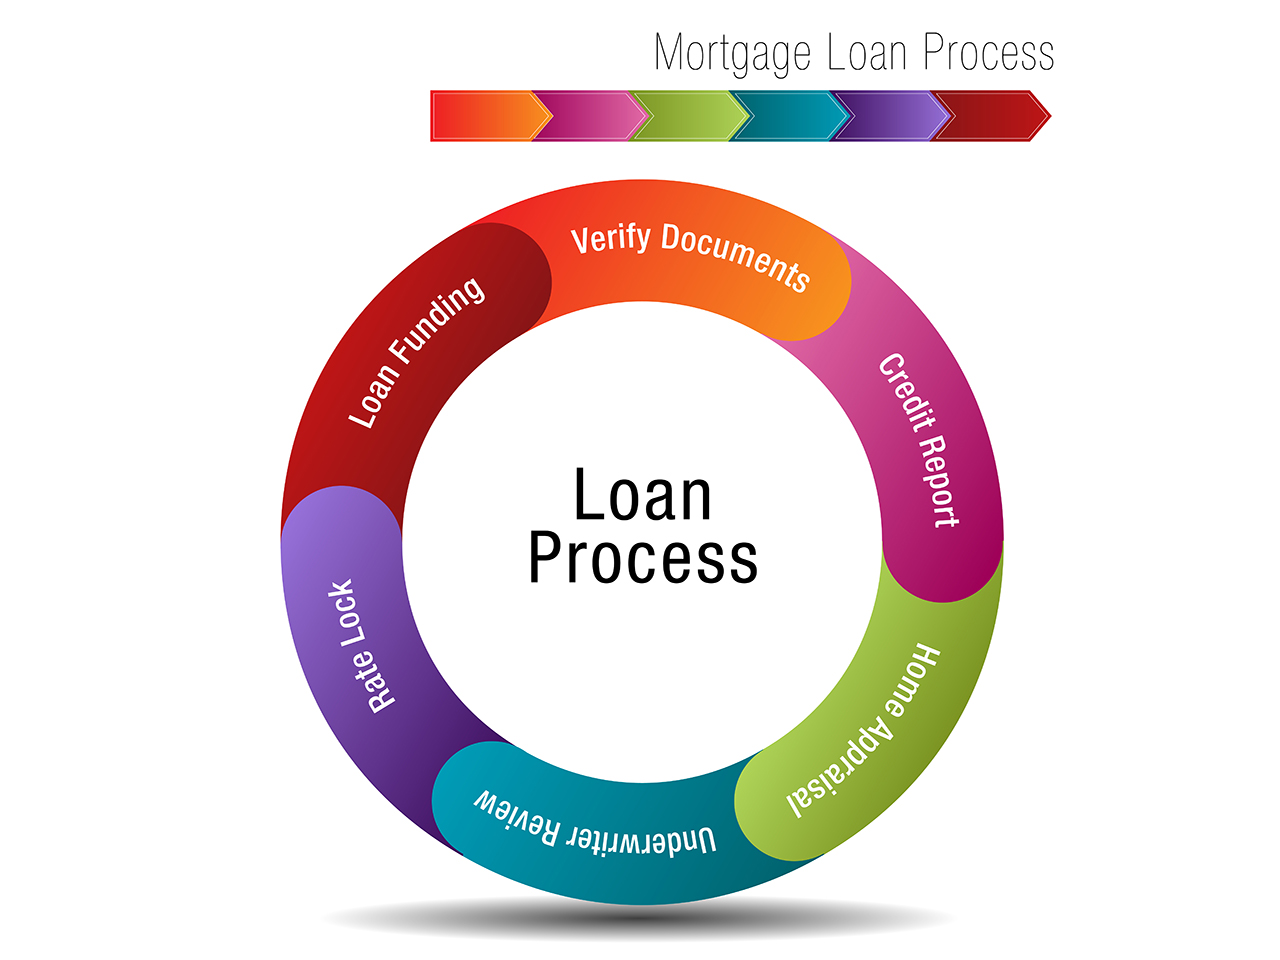 https://apmortgagesolutions.co.uk/wp-content/uploads/2021/07/about-our-process.jpg